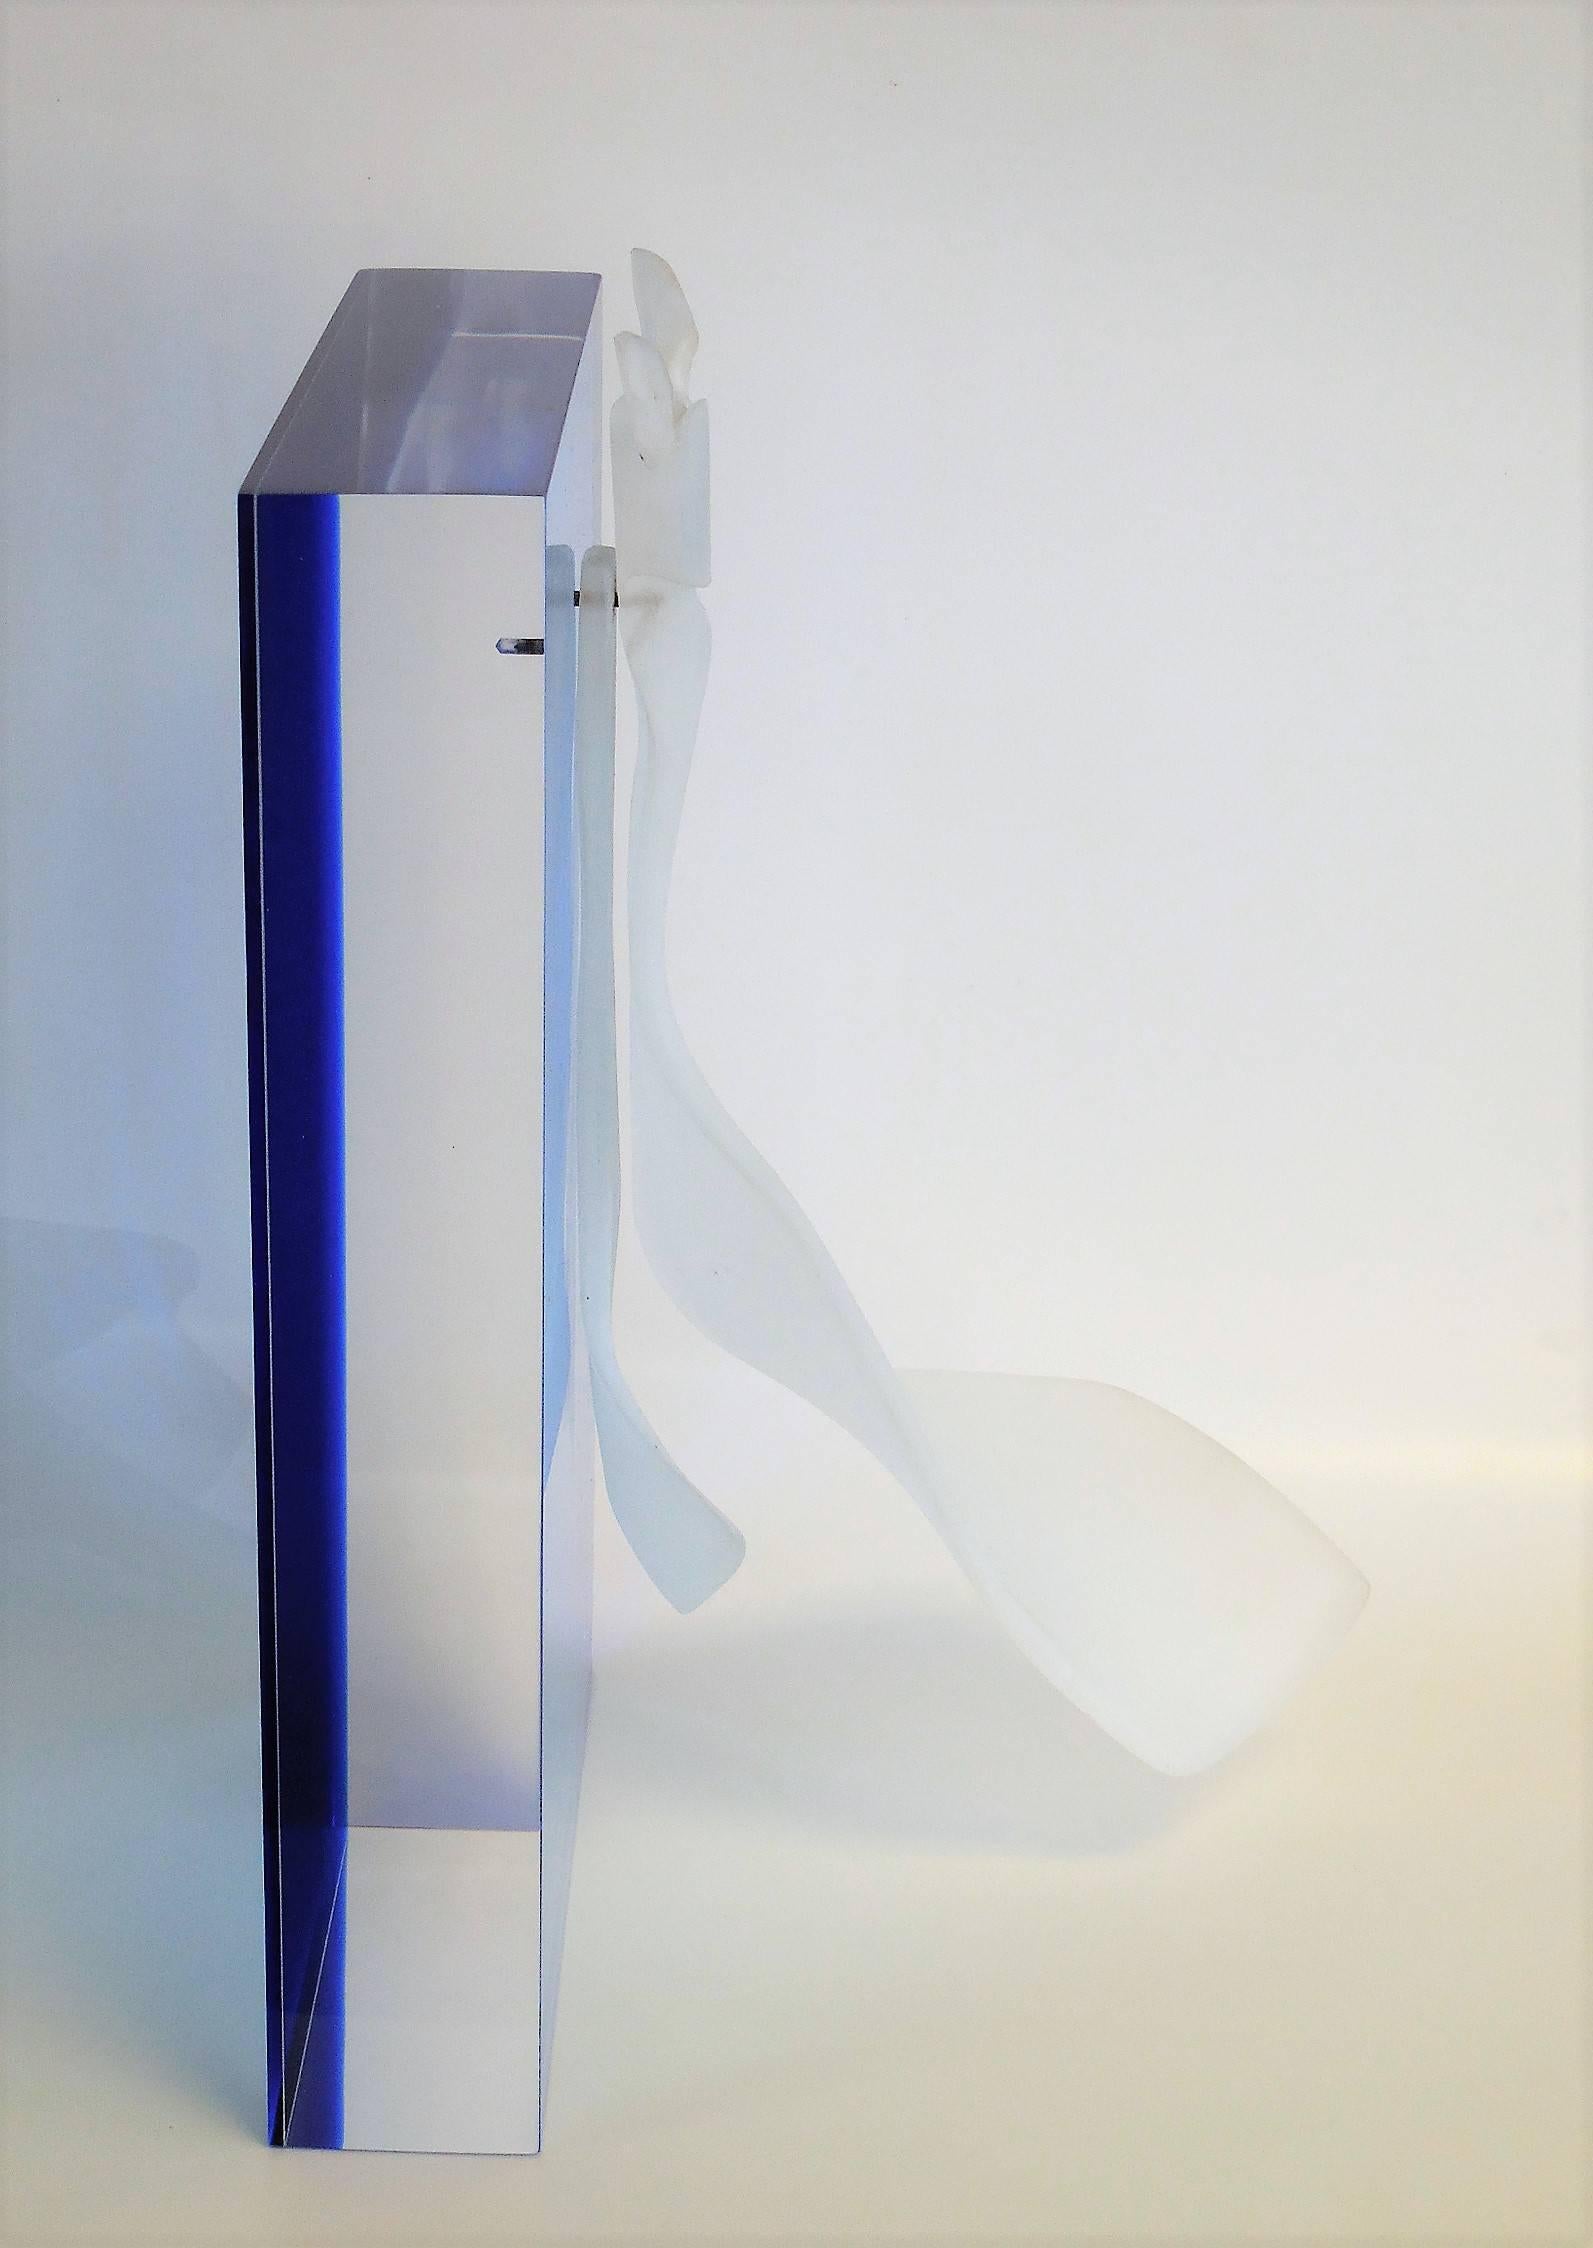 A unique modern Lucite sculpture. A block of Lucite is the background for the realistic sandblasted acrylic tie. Beautifully executed. Name of sculpture is 